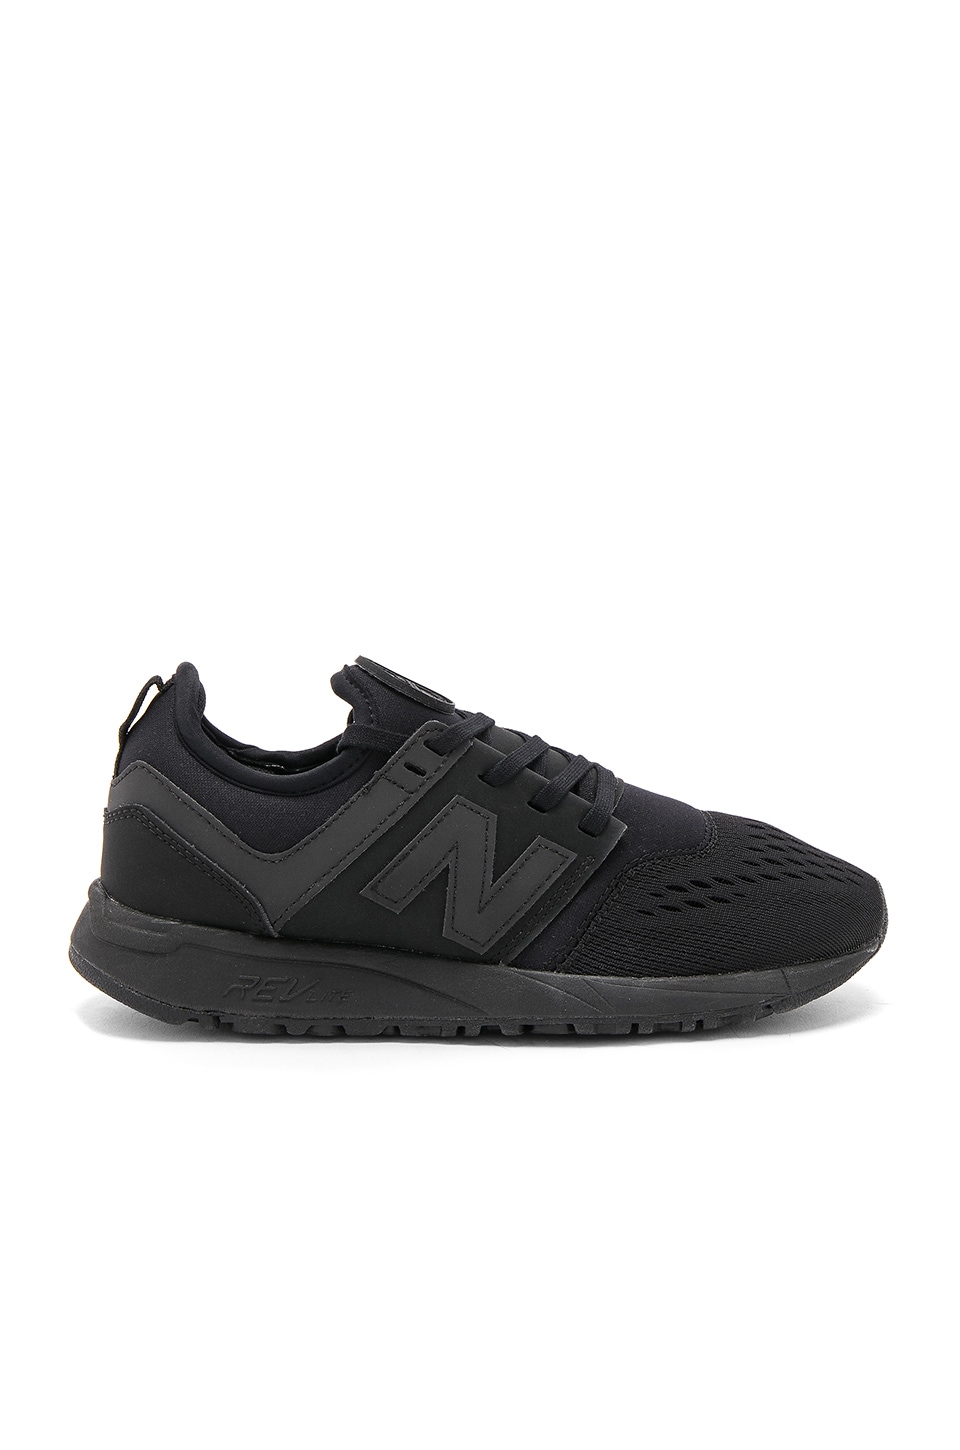 3 Stores In Stock: NEW BALANCE Women'S 247 Lace Up Sneakers, Black ...